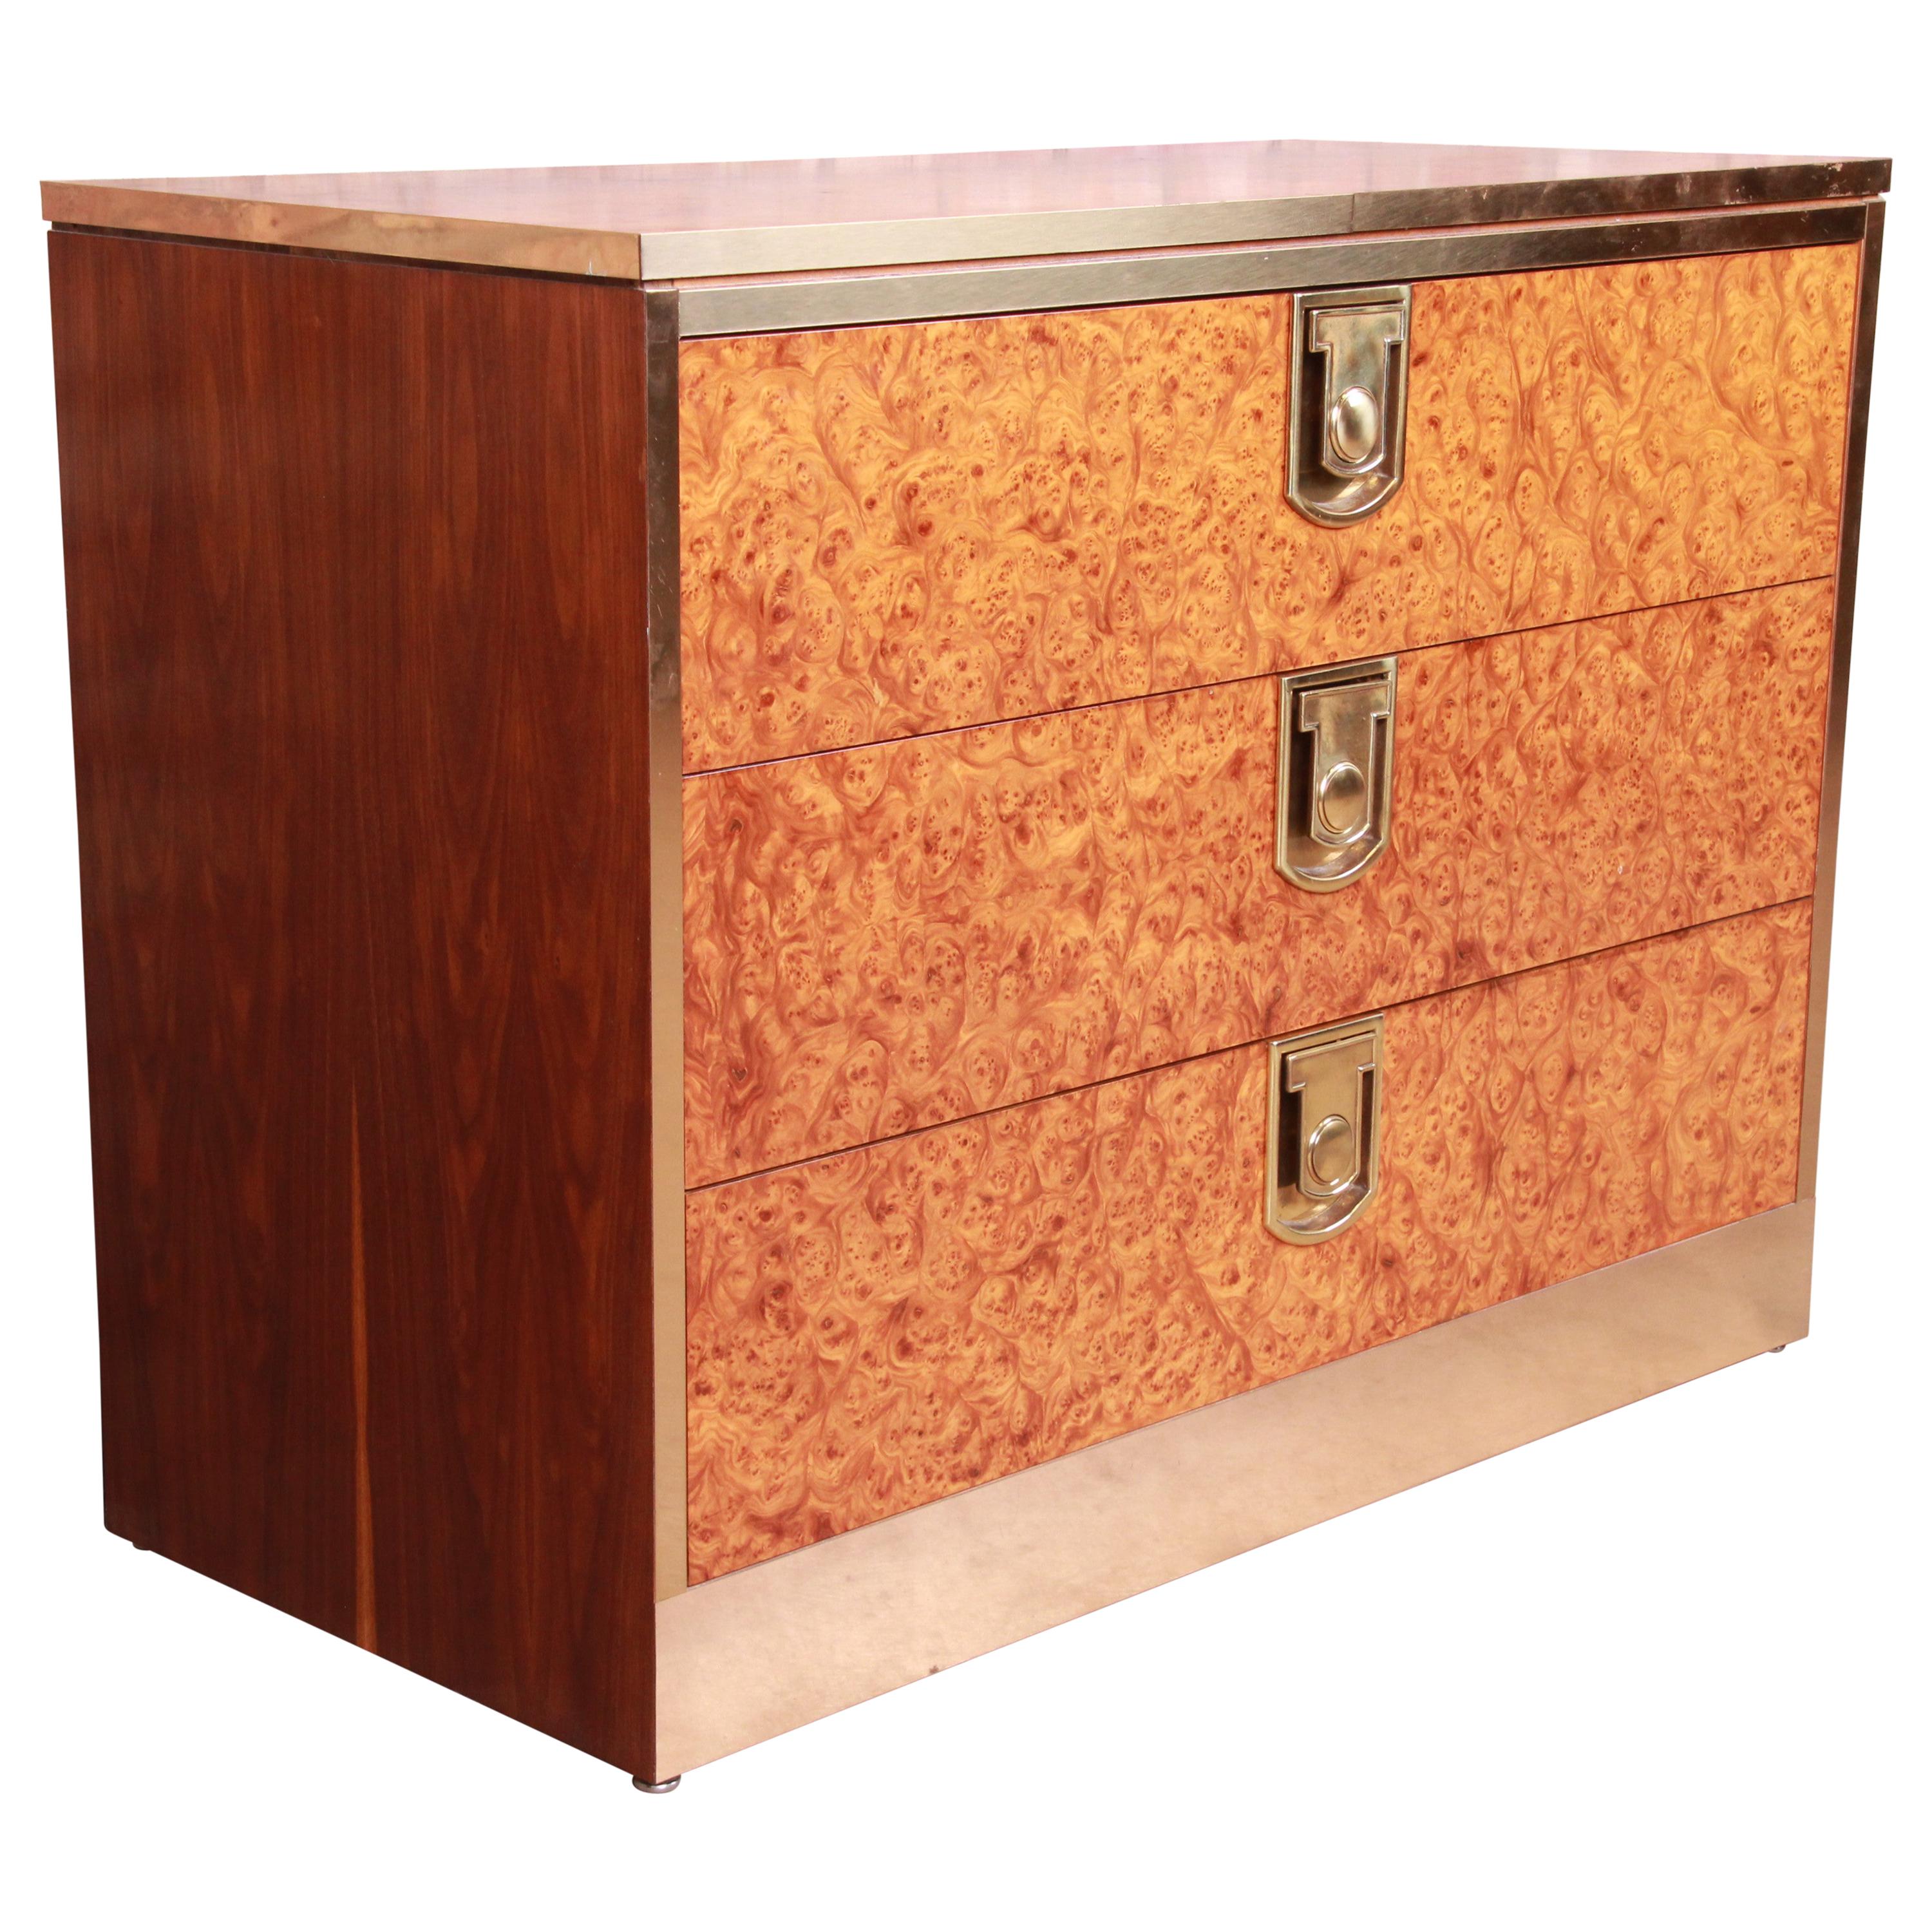 Mastercraft Burl, Rosewood, and Brass Chest of Drawers, circa 1970s